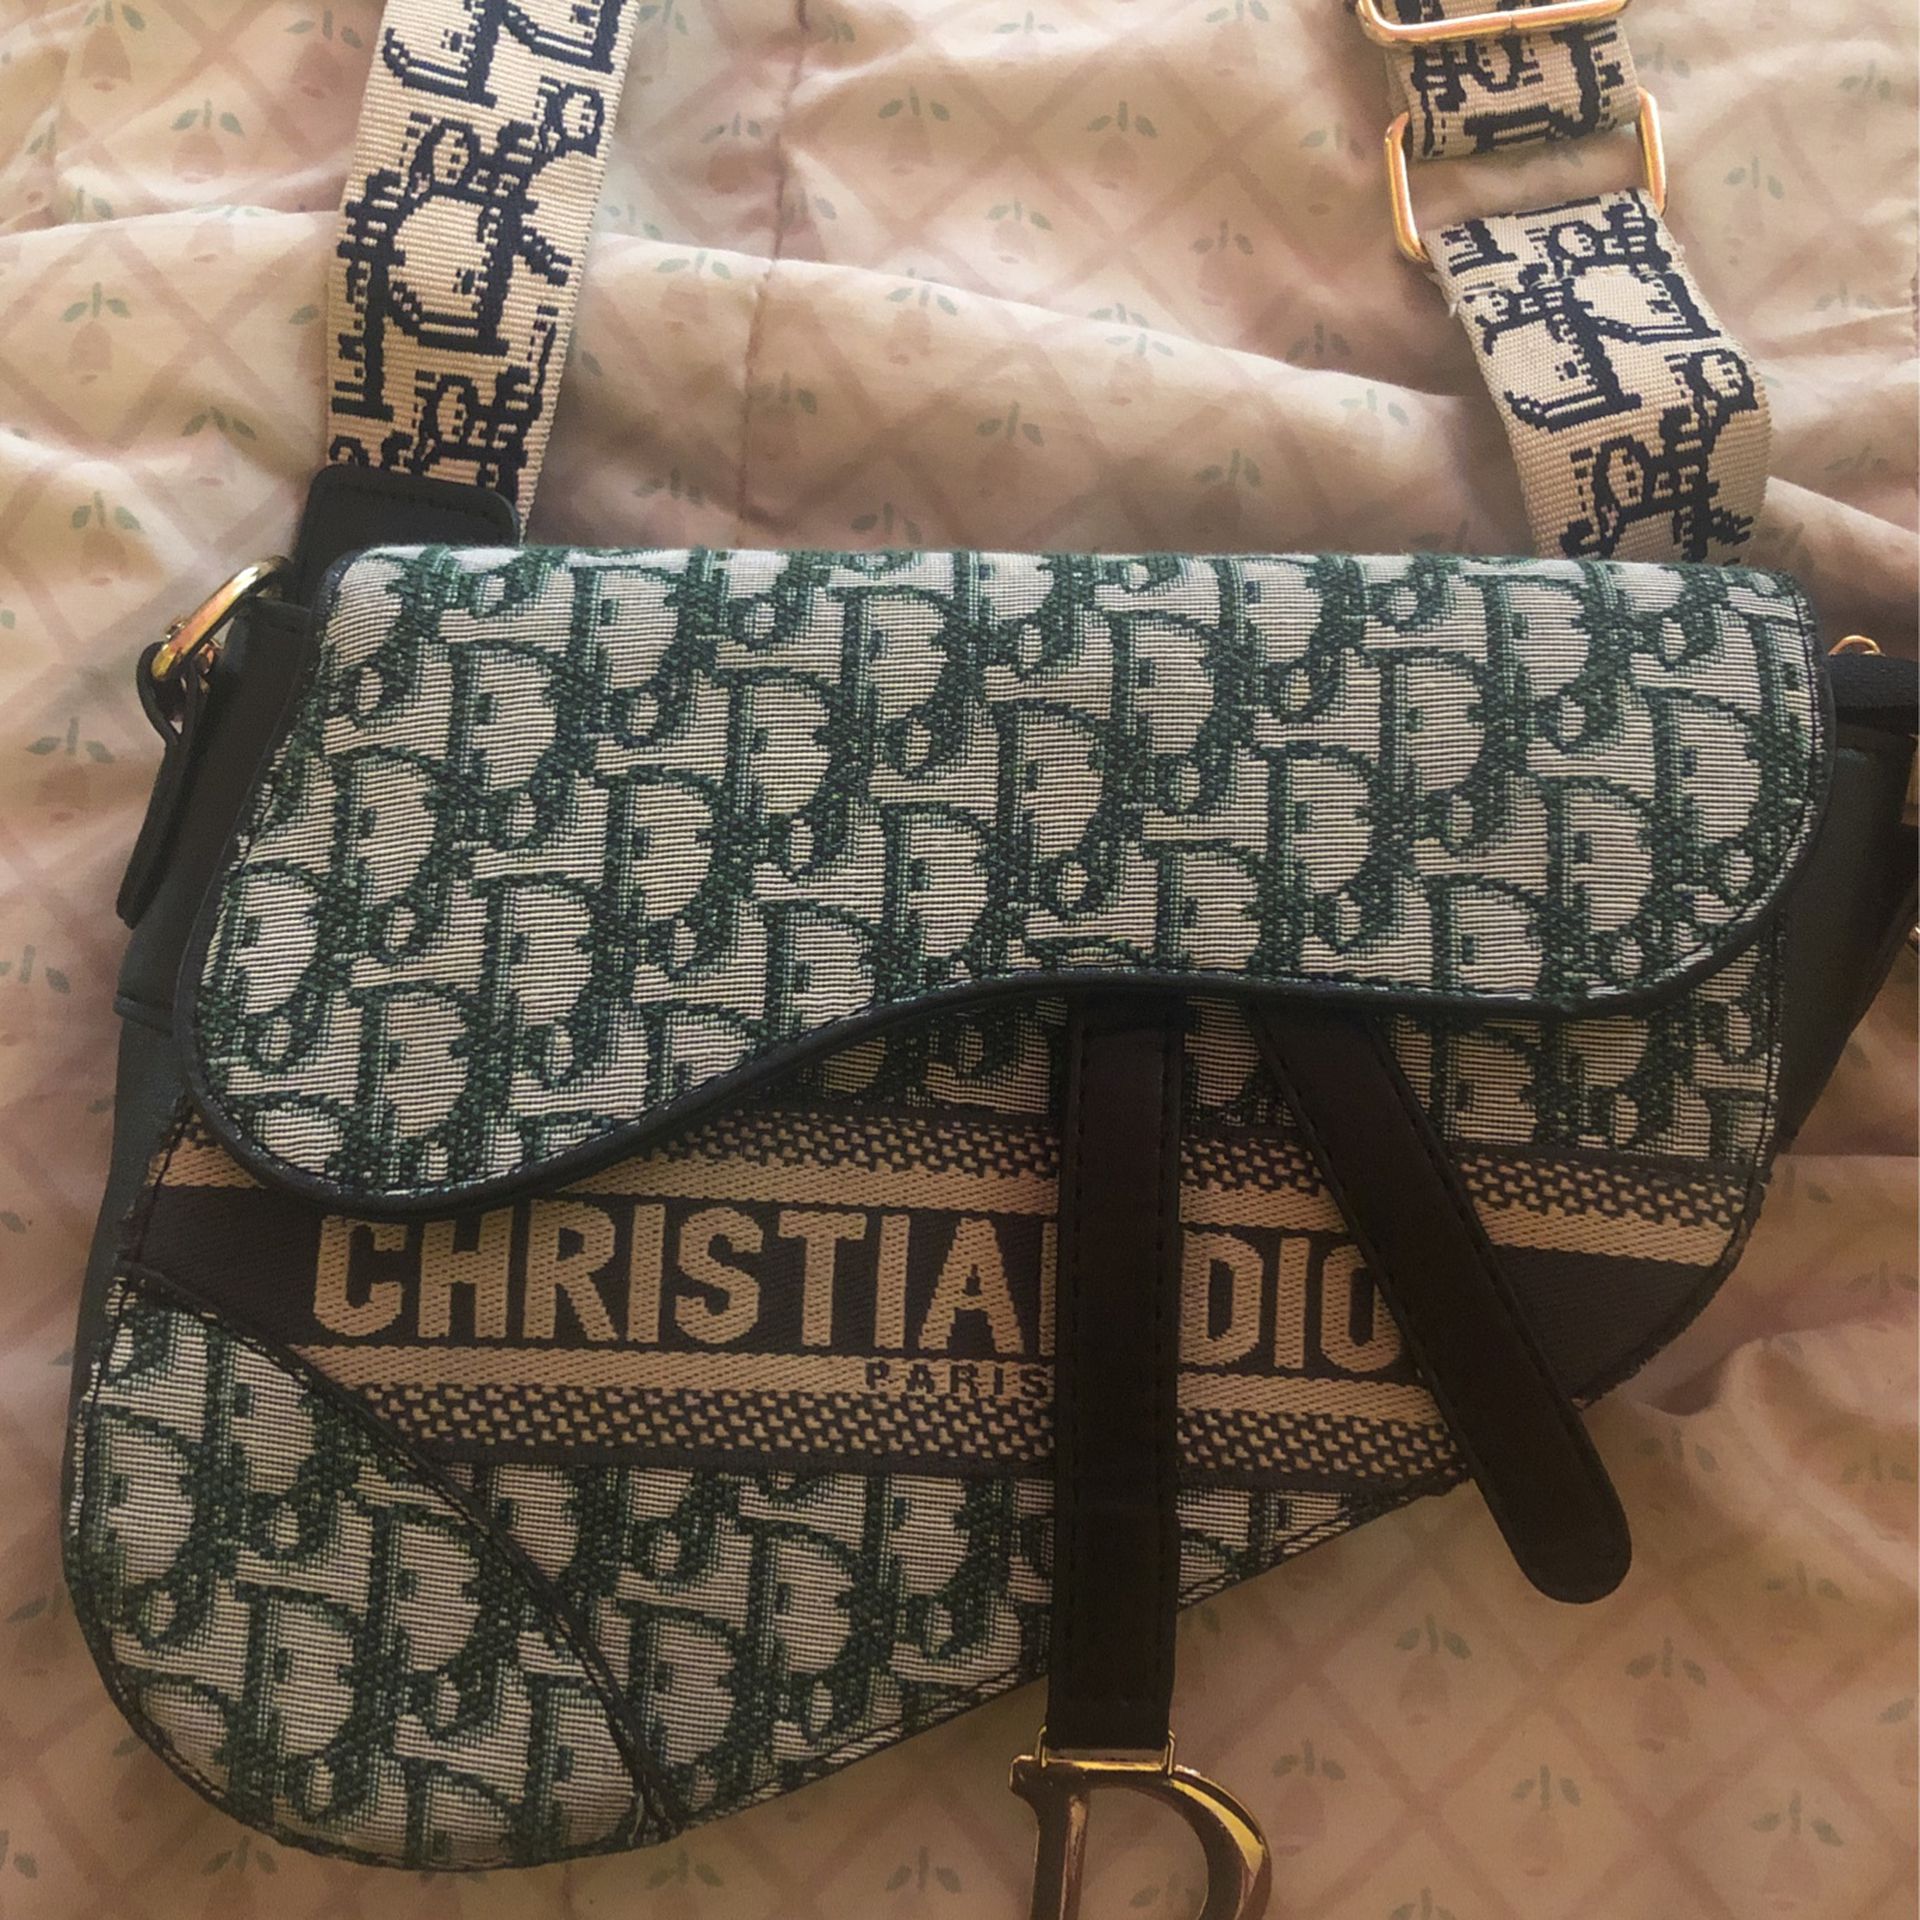 Dior Bag Going For Cheap